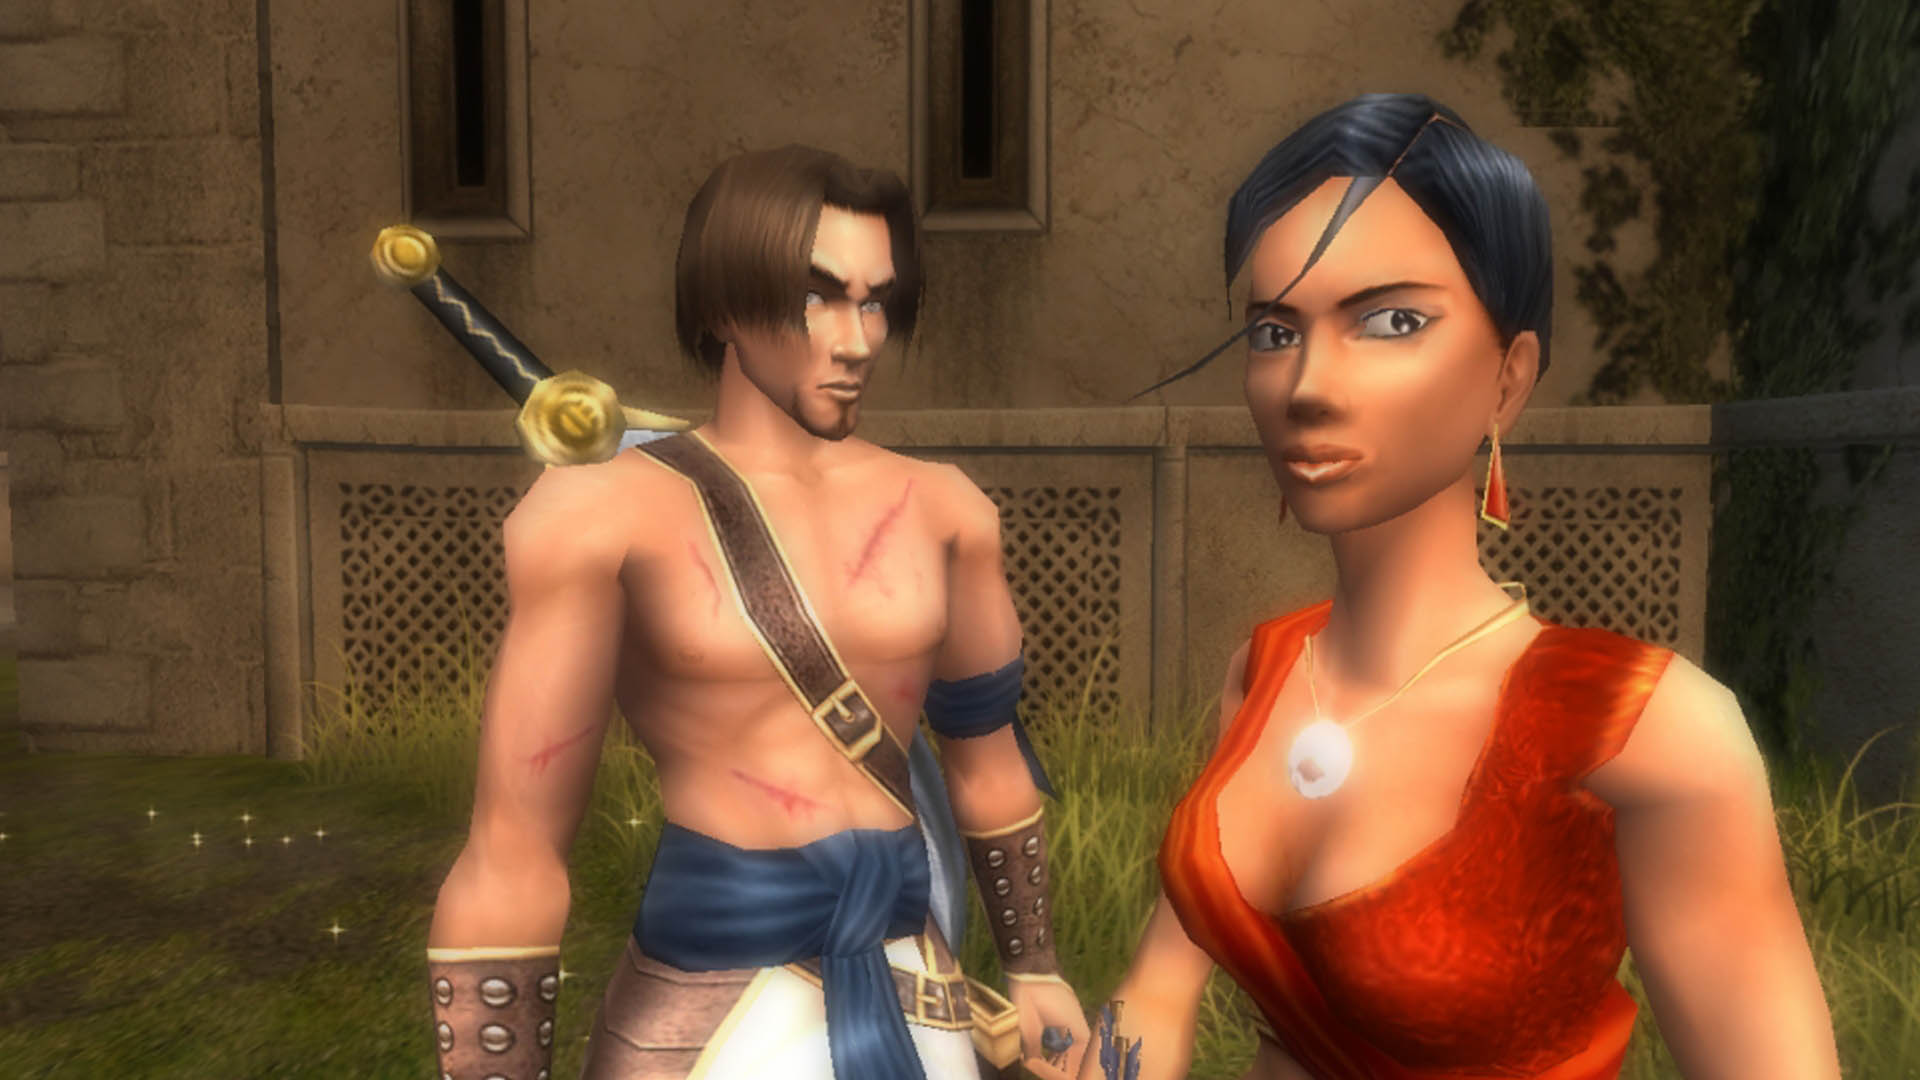 Prince of Persia: Sands of Time won't release this year, and won't